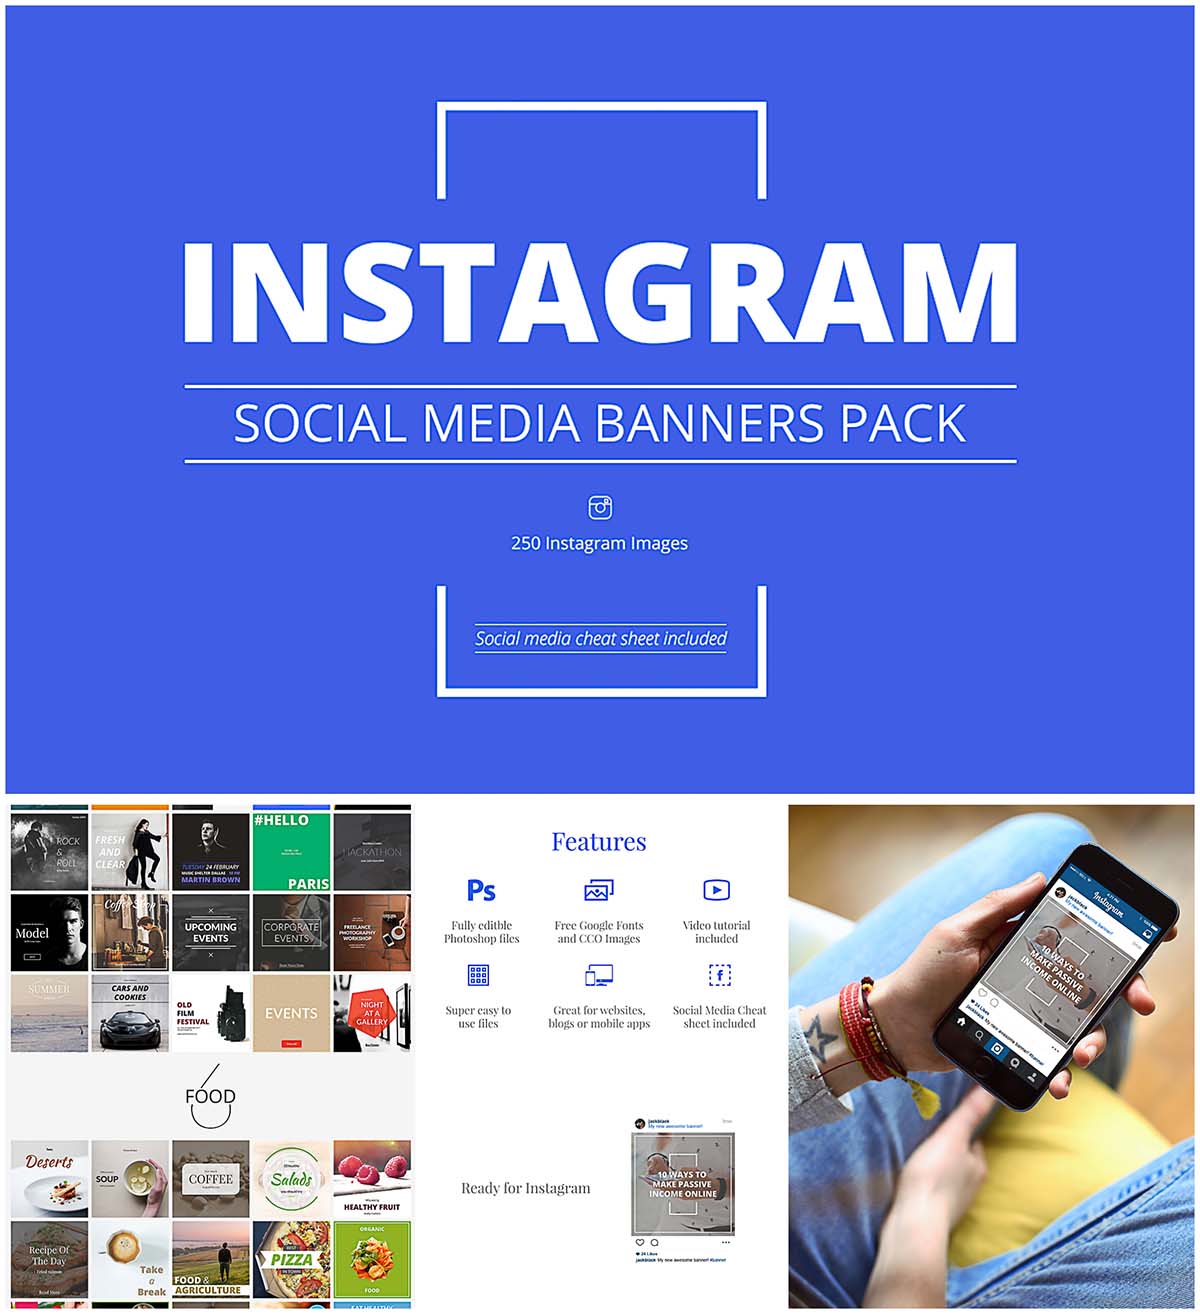 Instagram social media banners collection